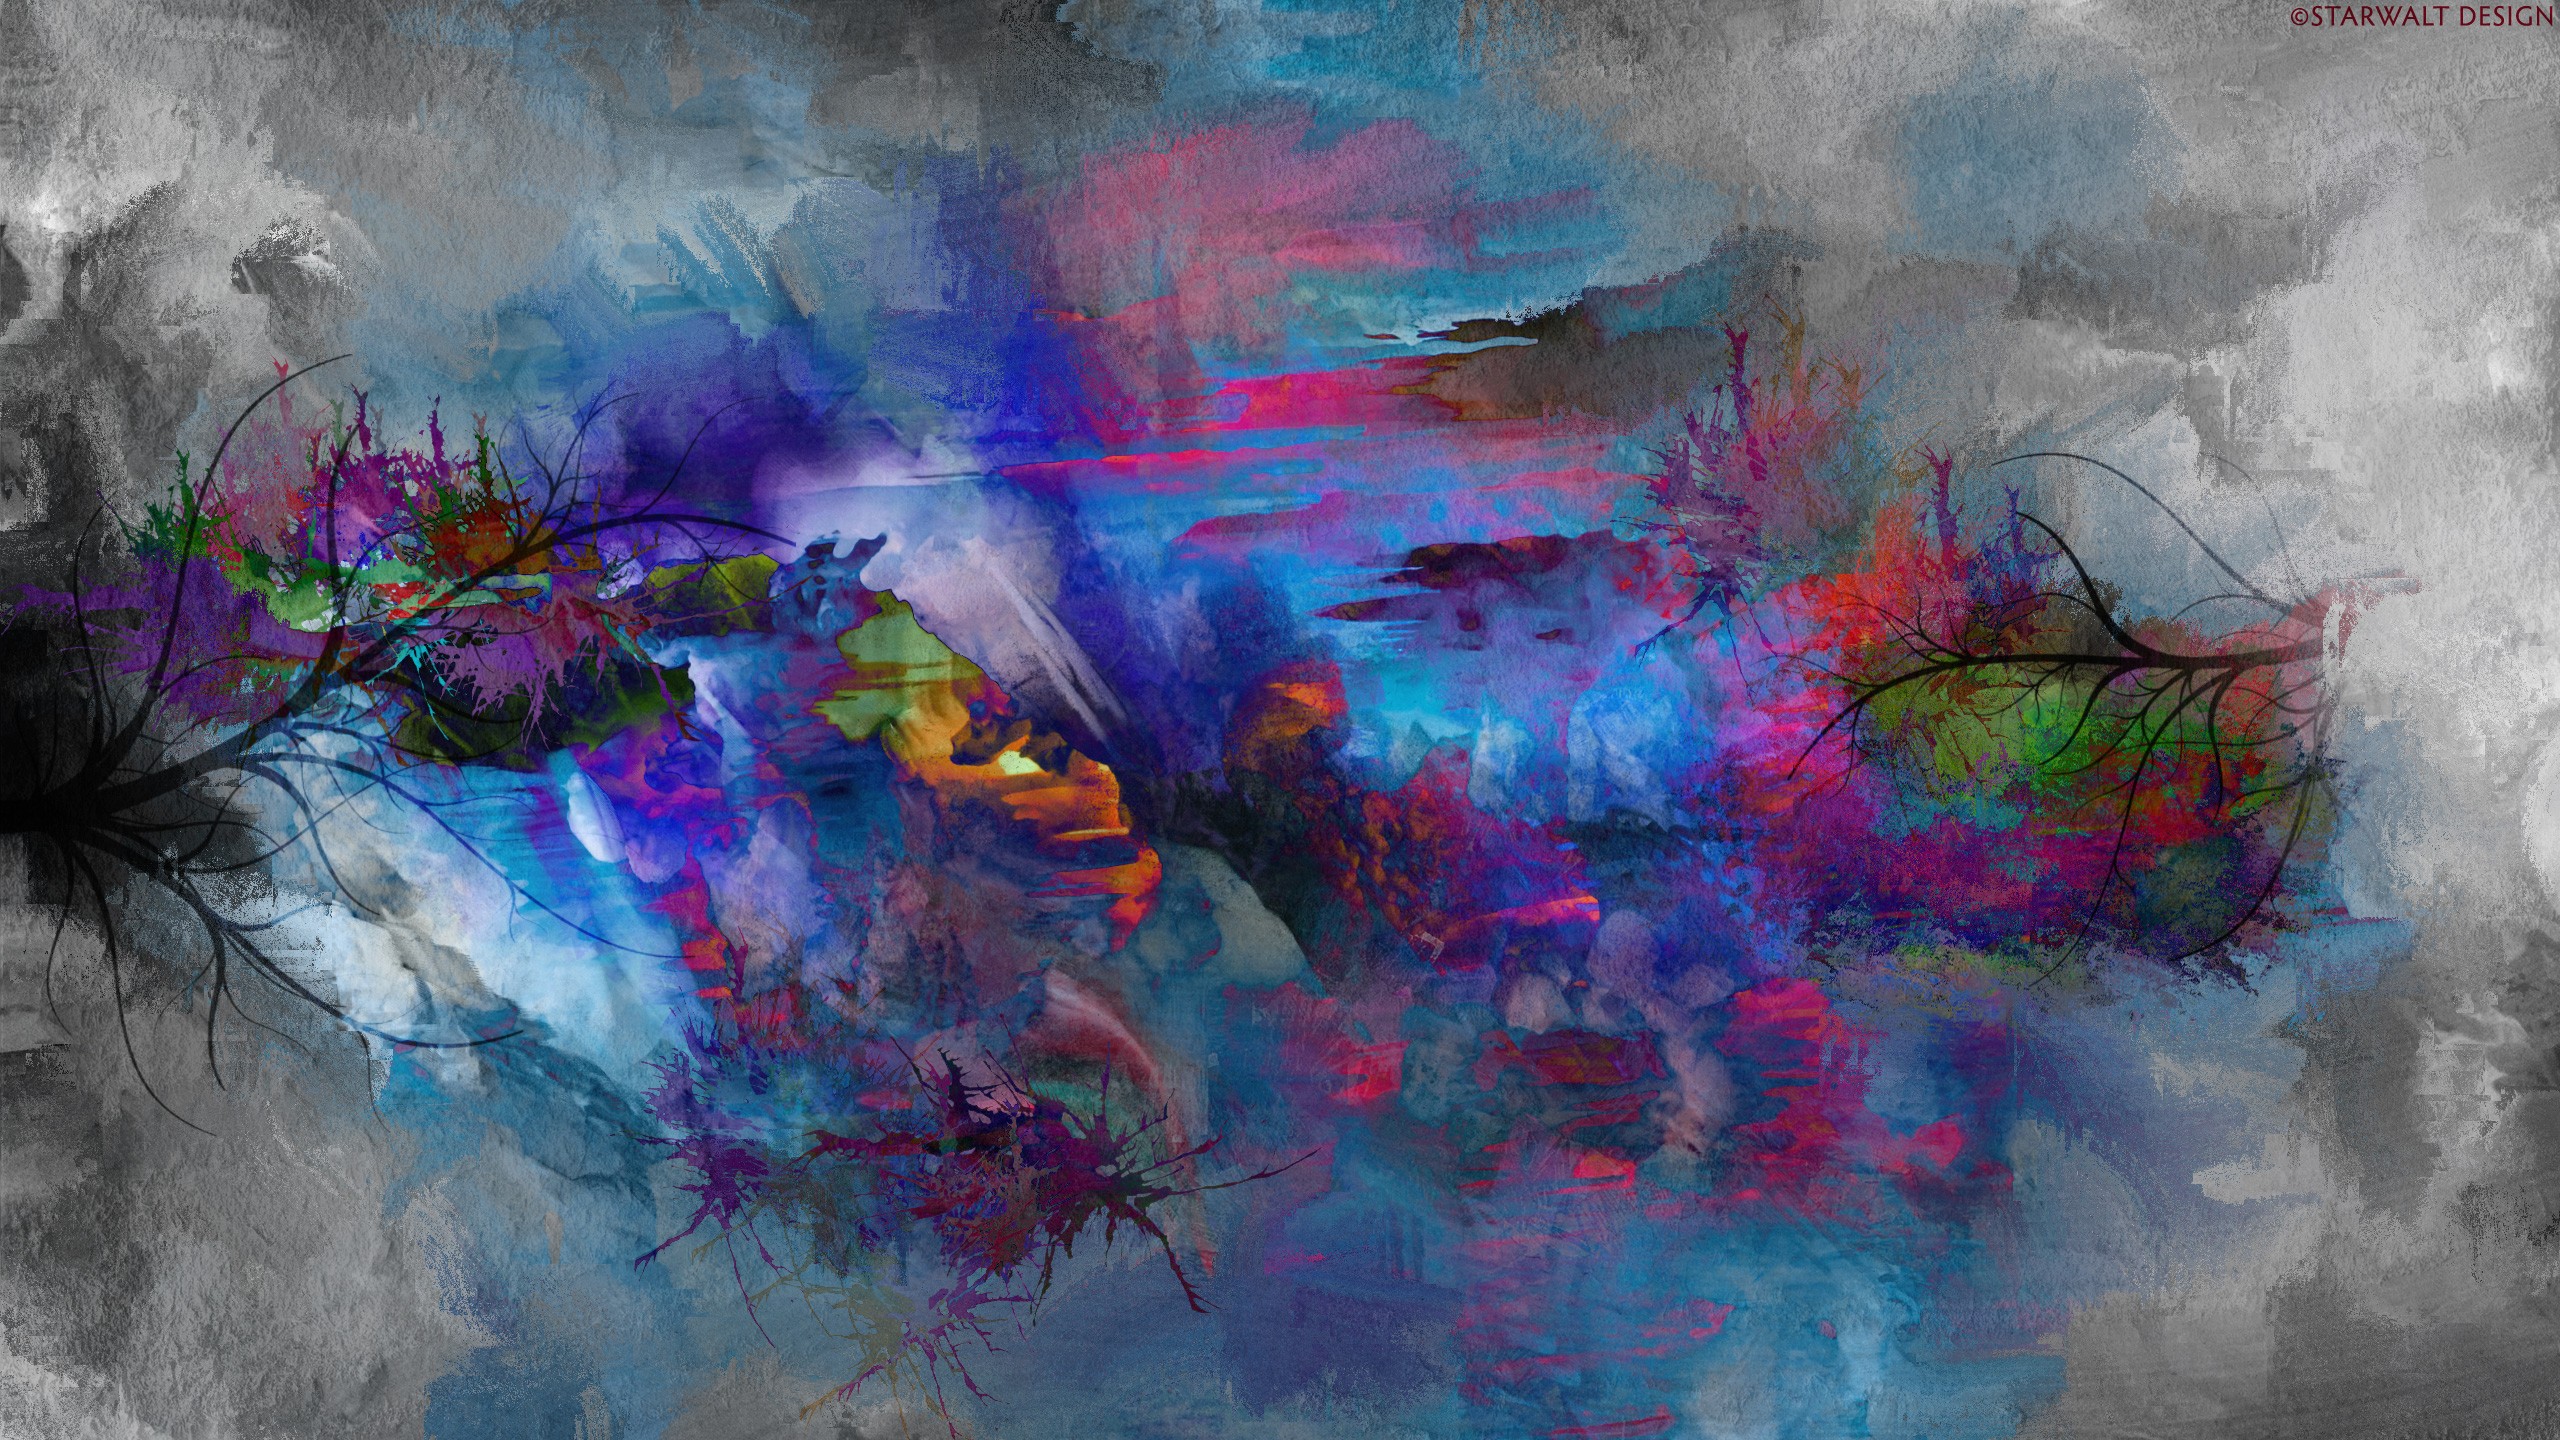 Abstract Nature Painting Wallpaper 2560x Jpg